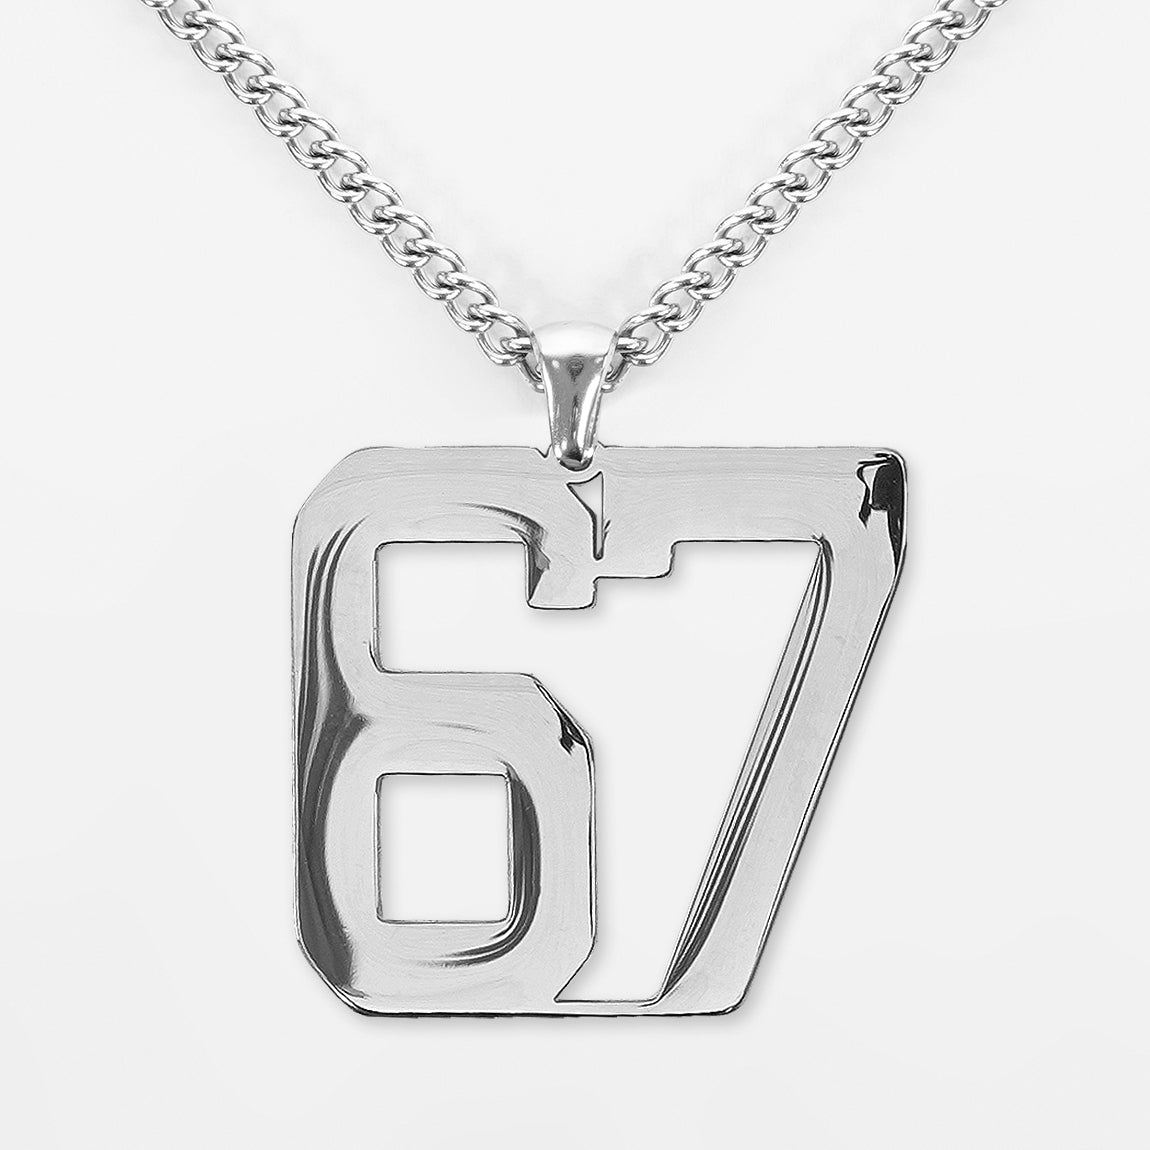 67 Number Pendant with Chain Necklace - Stainless Steel